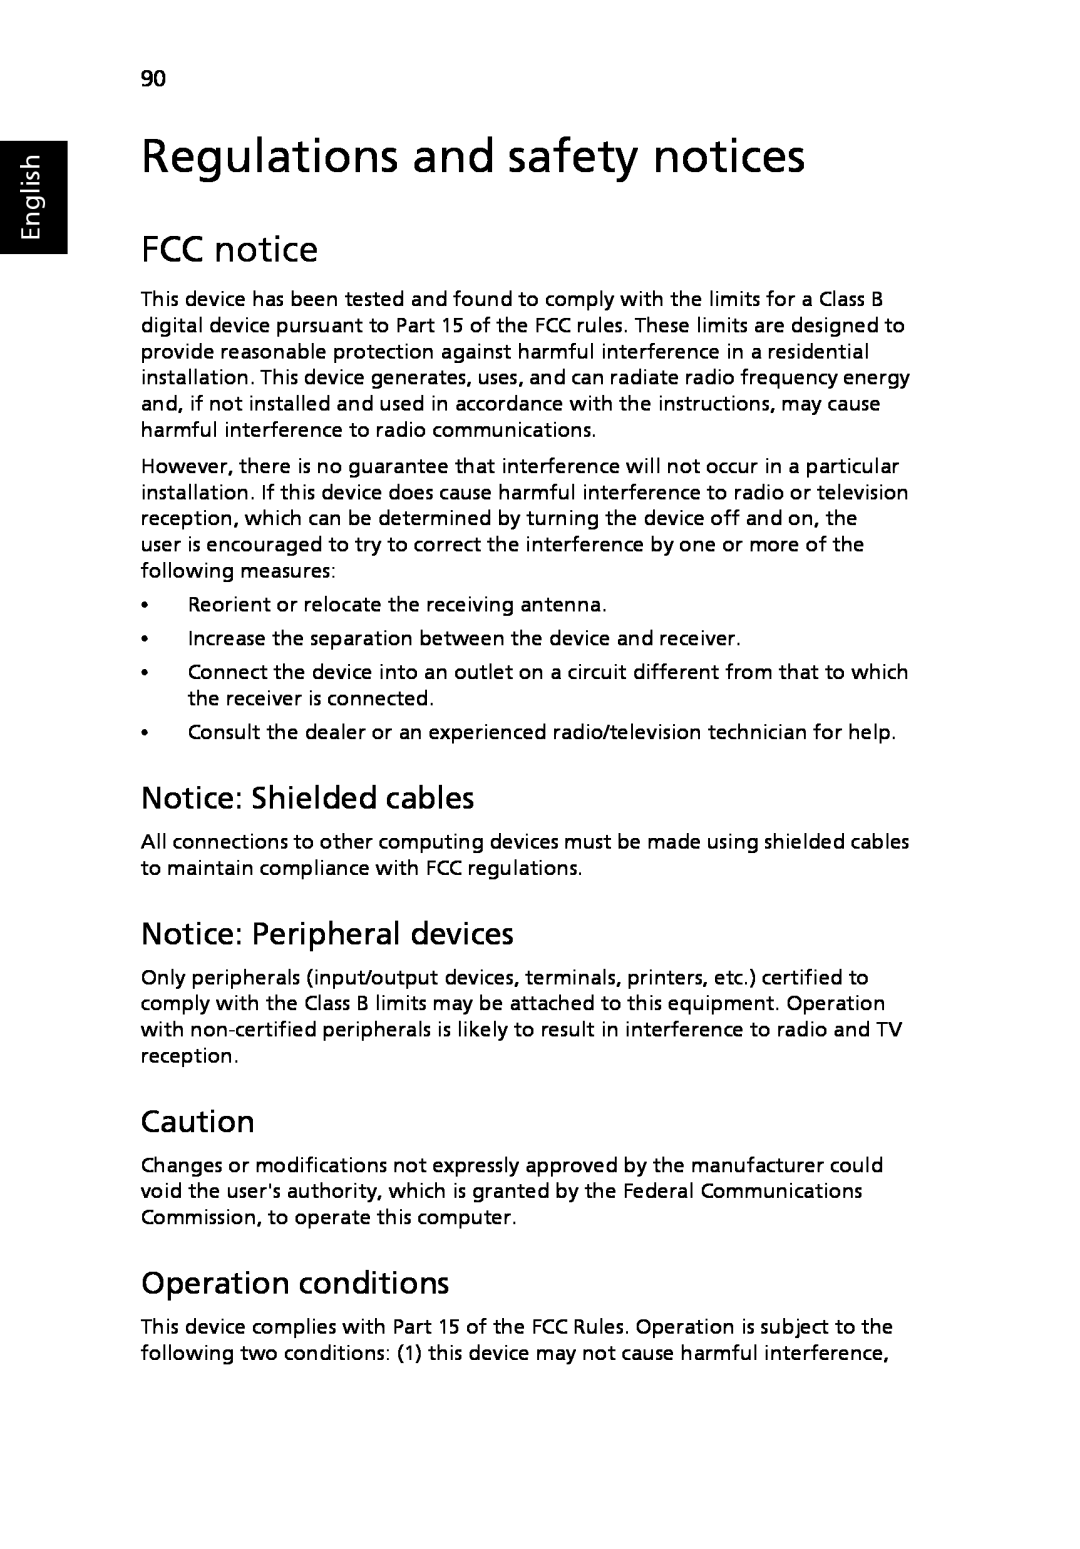 Acer 9120 manual Regulations and safety notices, FCC notice, Notice Shielded cables, Notice Peripheral devices, English 